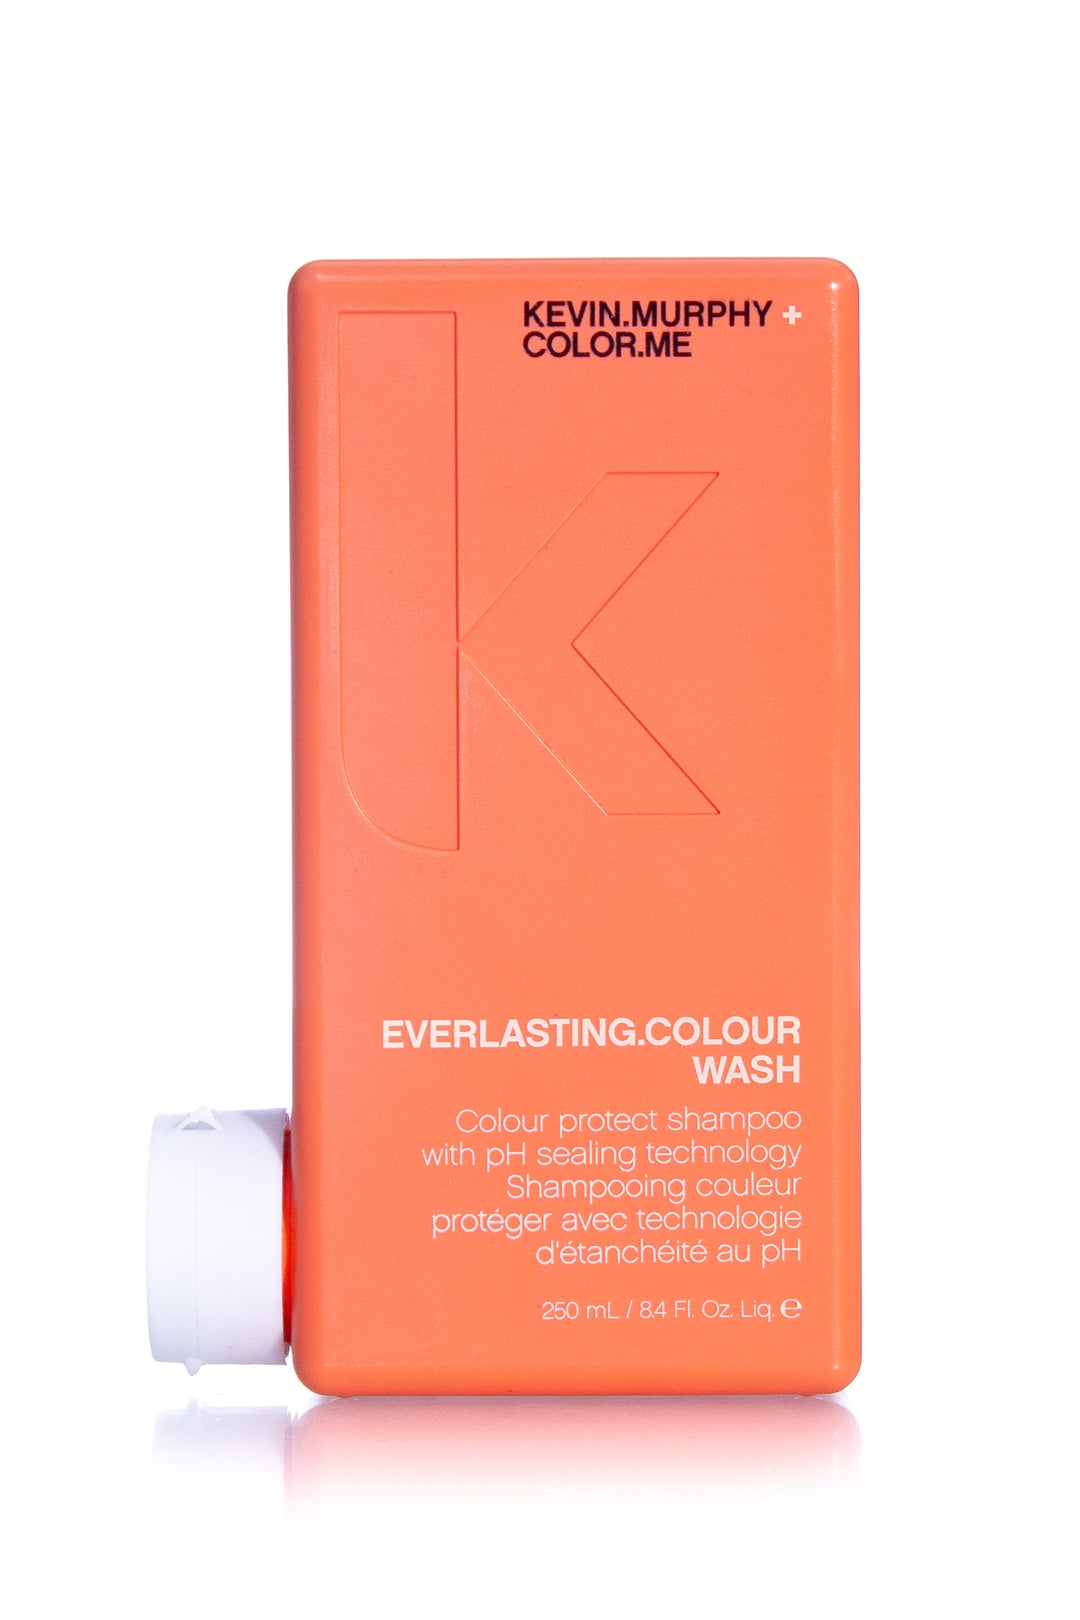 KEVIN MURPHY Color Me Everlasting Colour Wash  | 250ml